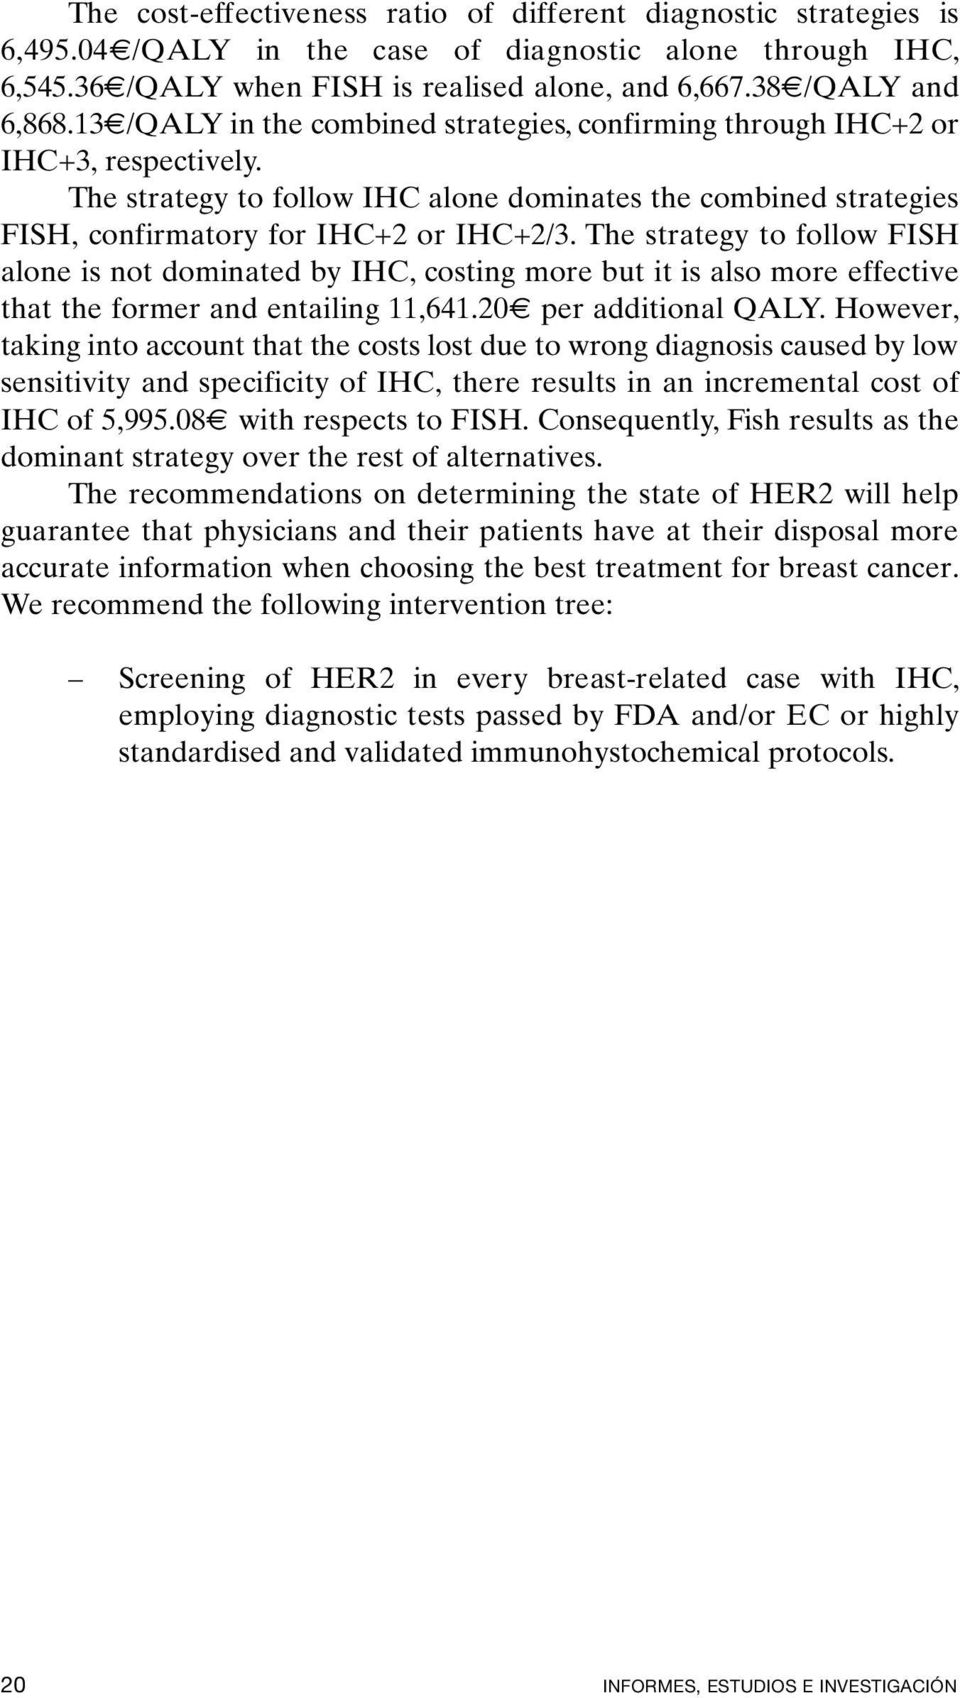 The strategy to follow IHC alone dominates the combined strategies FISH, confirmatory for IHC+2 or IHC+2/3.